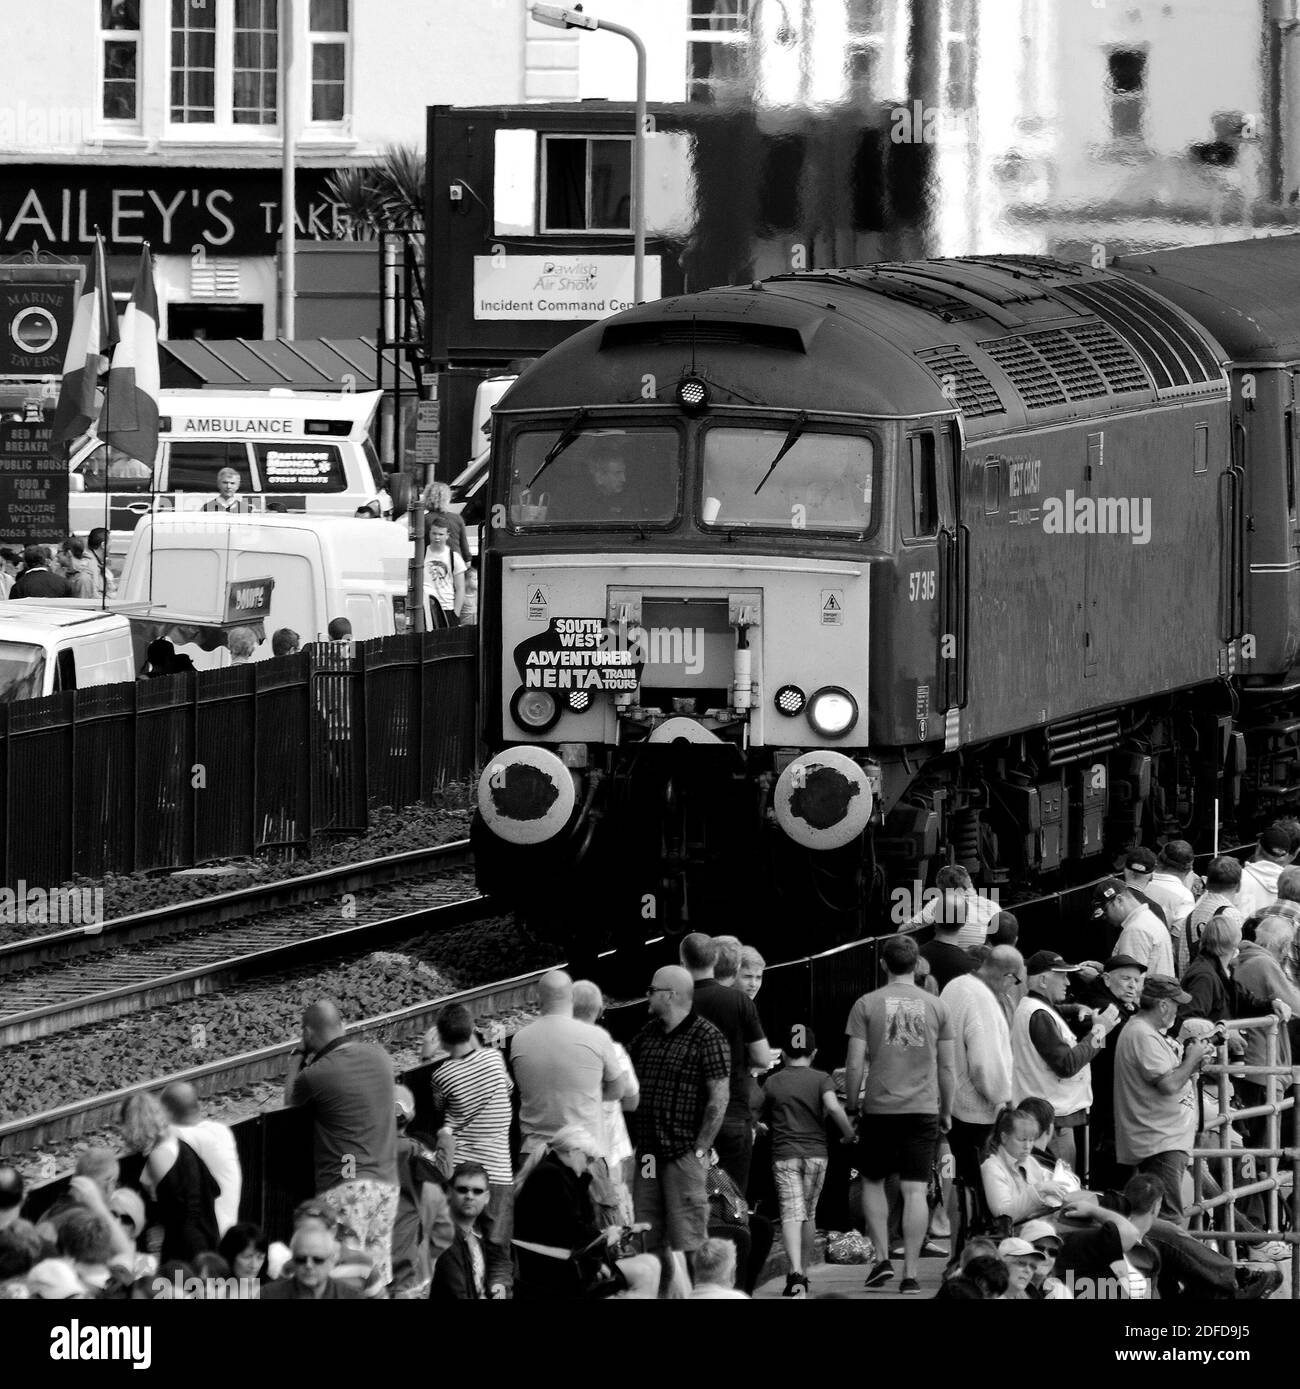 '57315' (leading) and '57804' (at the rear) at Dawlish with a railtour for Torbay. Stock Photo